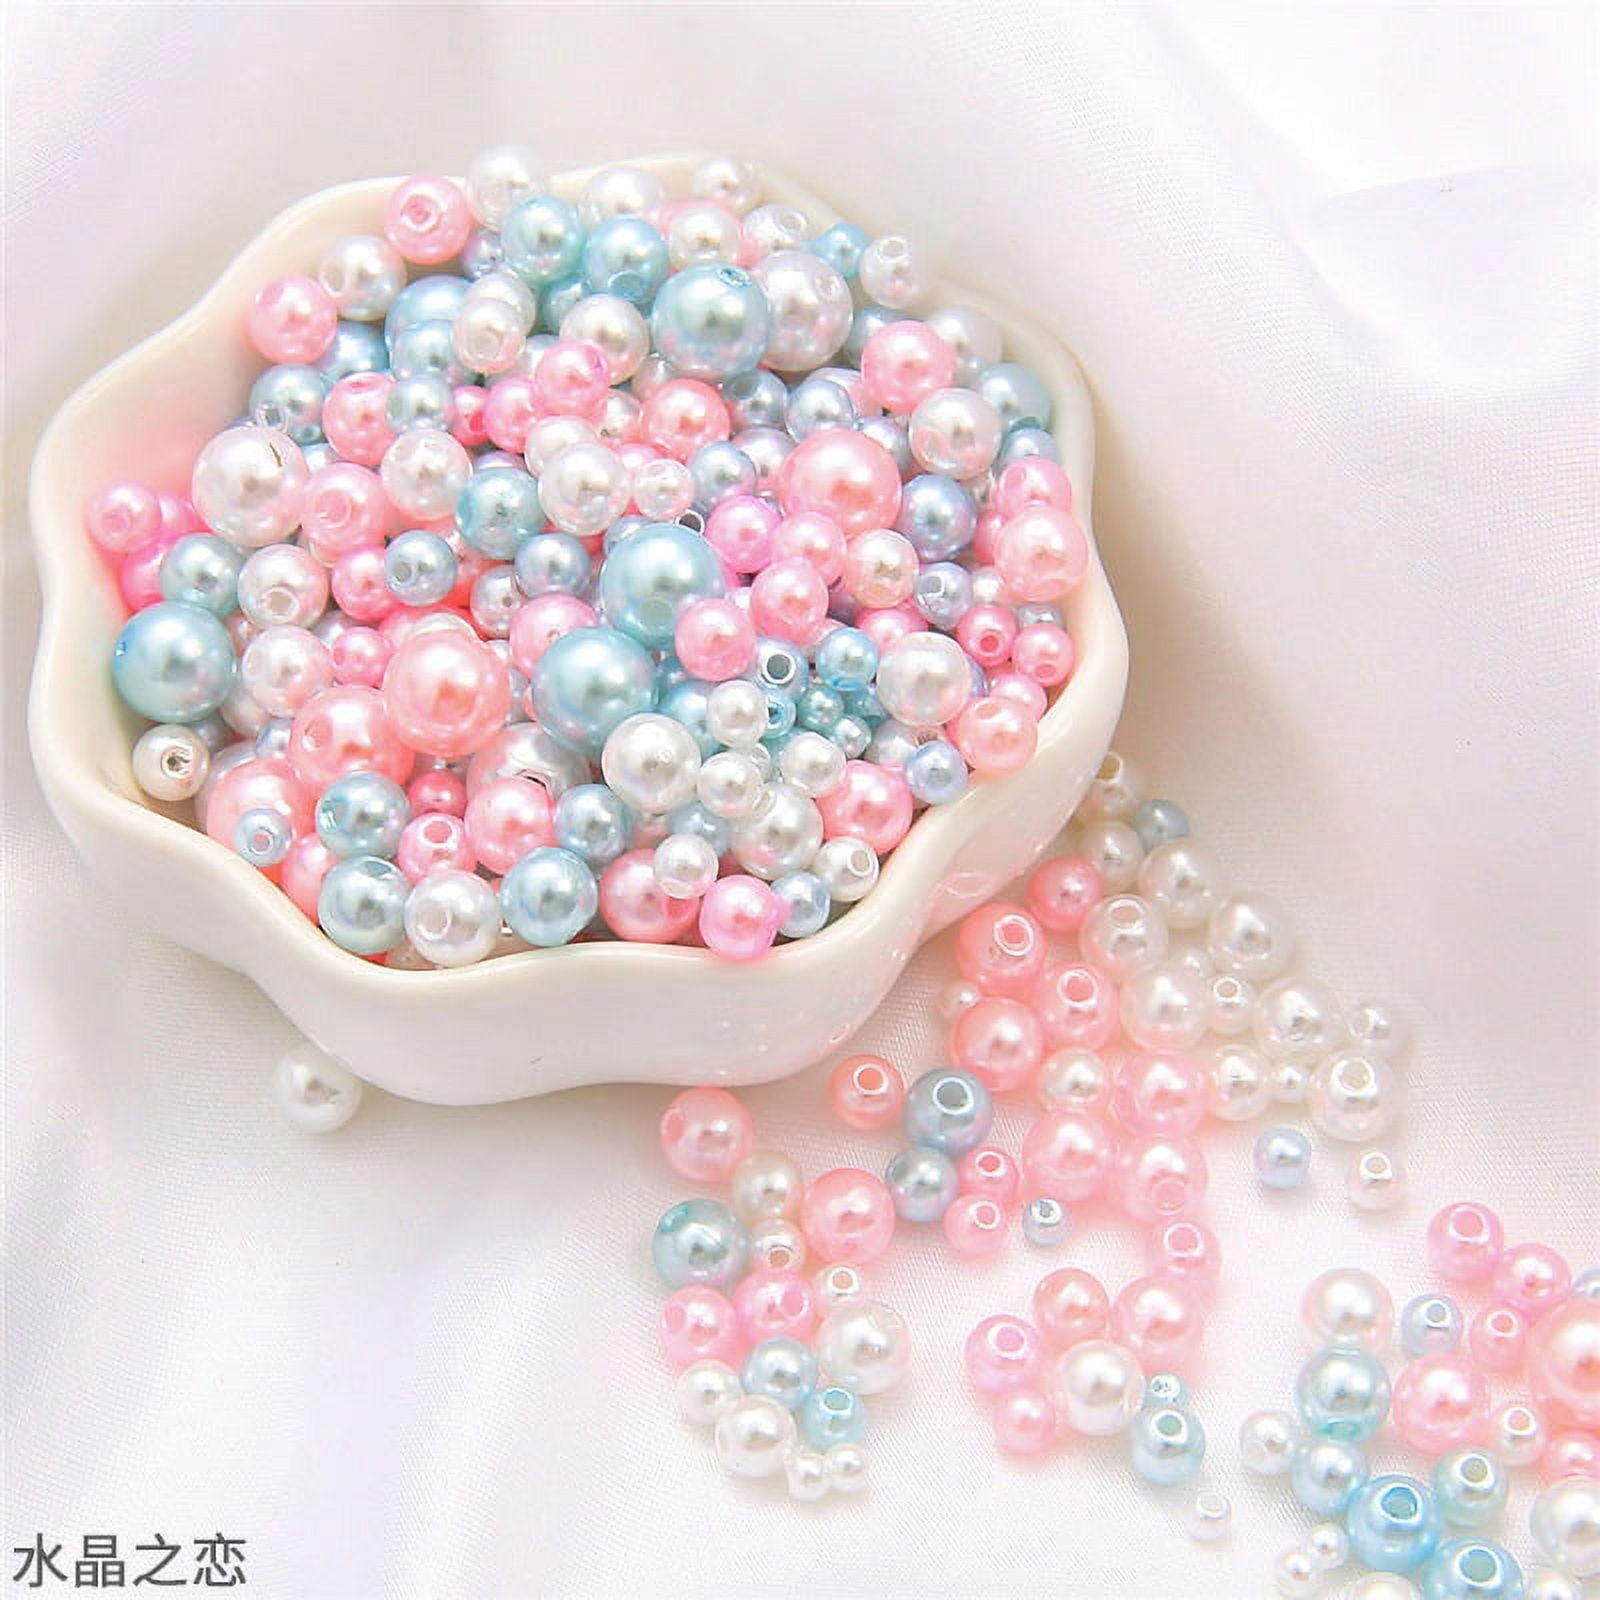 Shop OLYCRAFT 200pcs 8mm Pearl Beads No Hole Makeup Pearl Beads